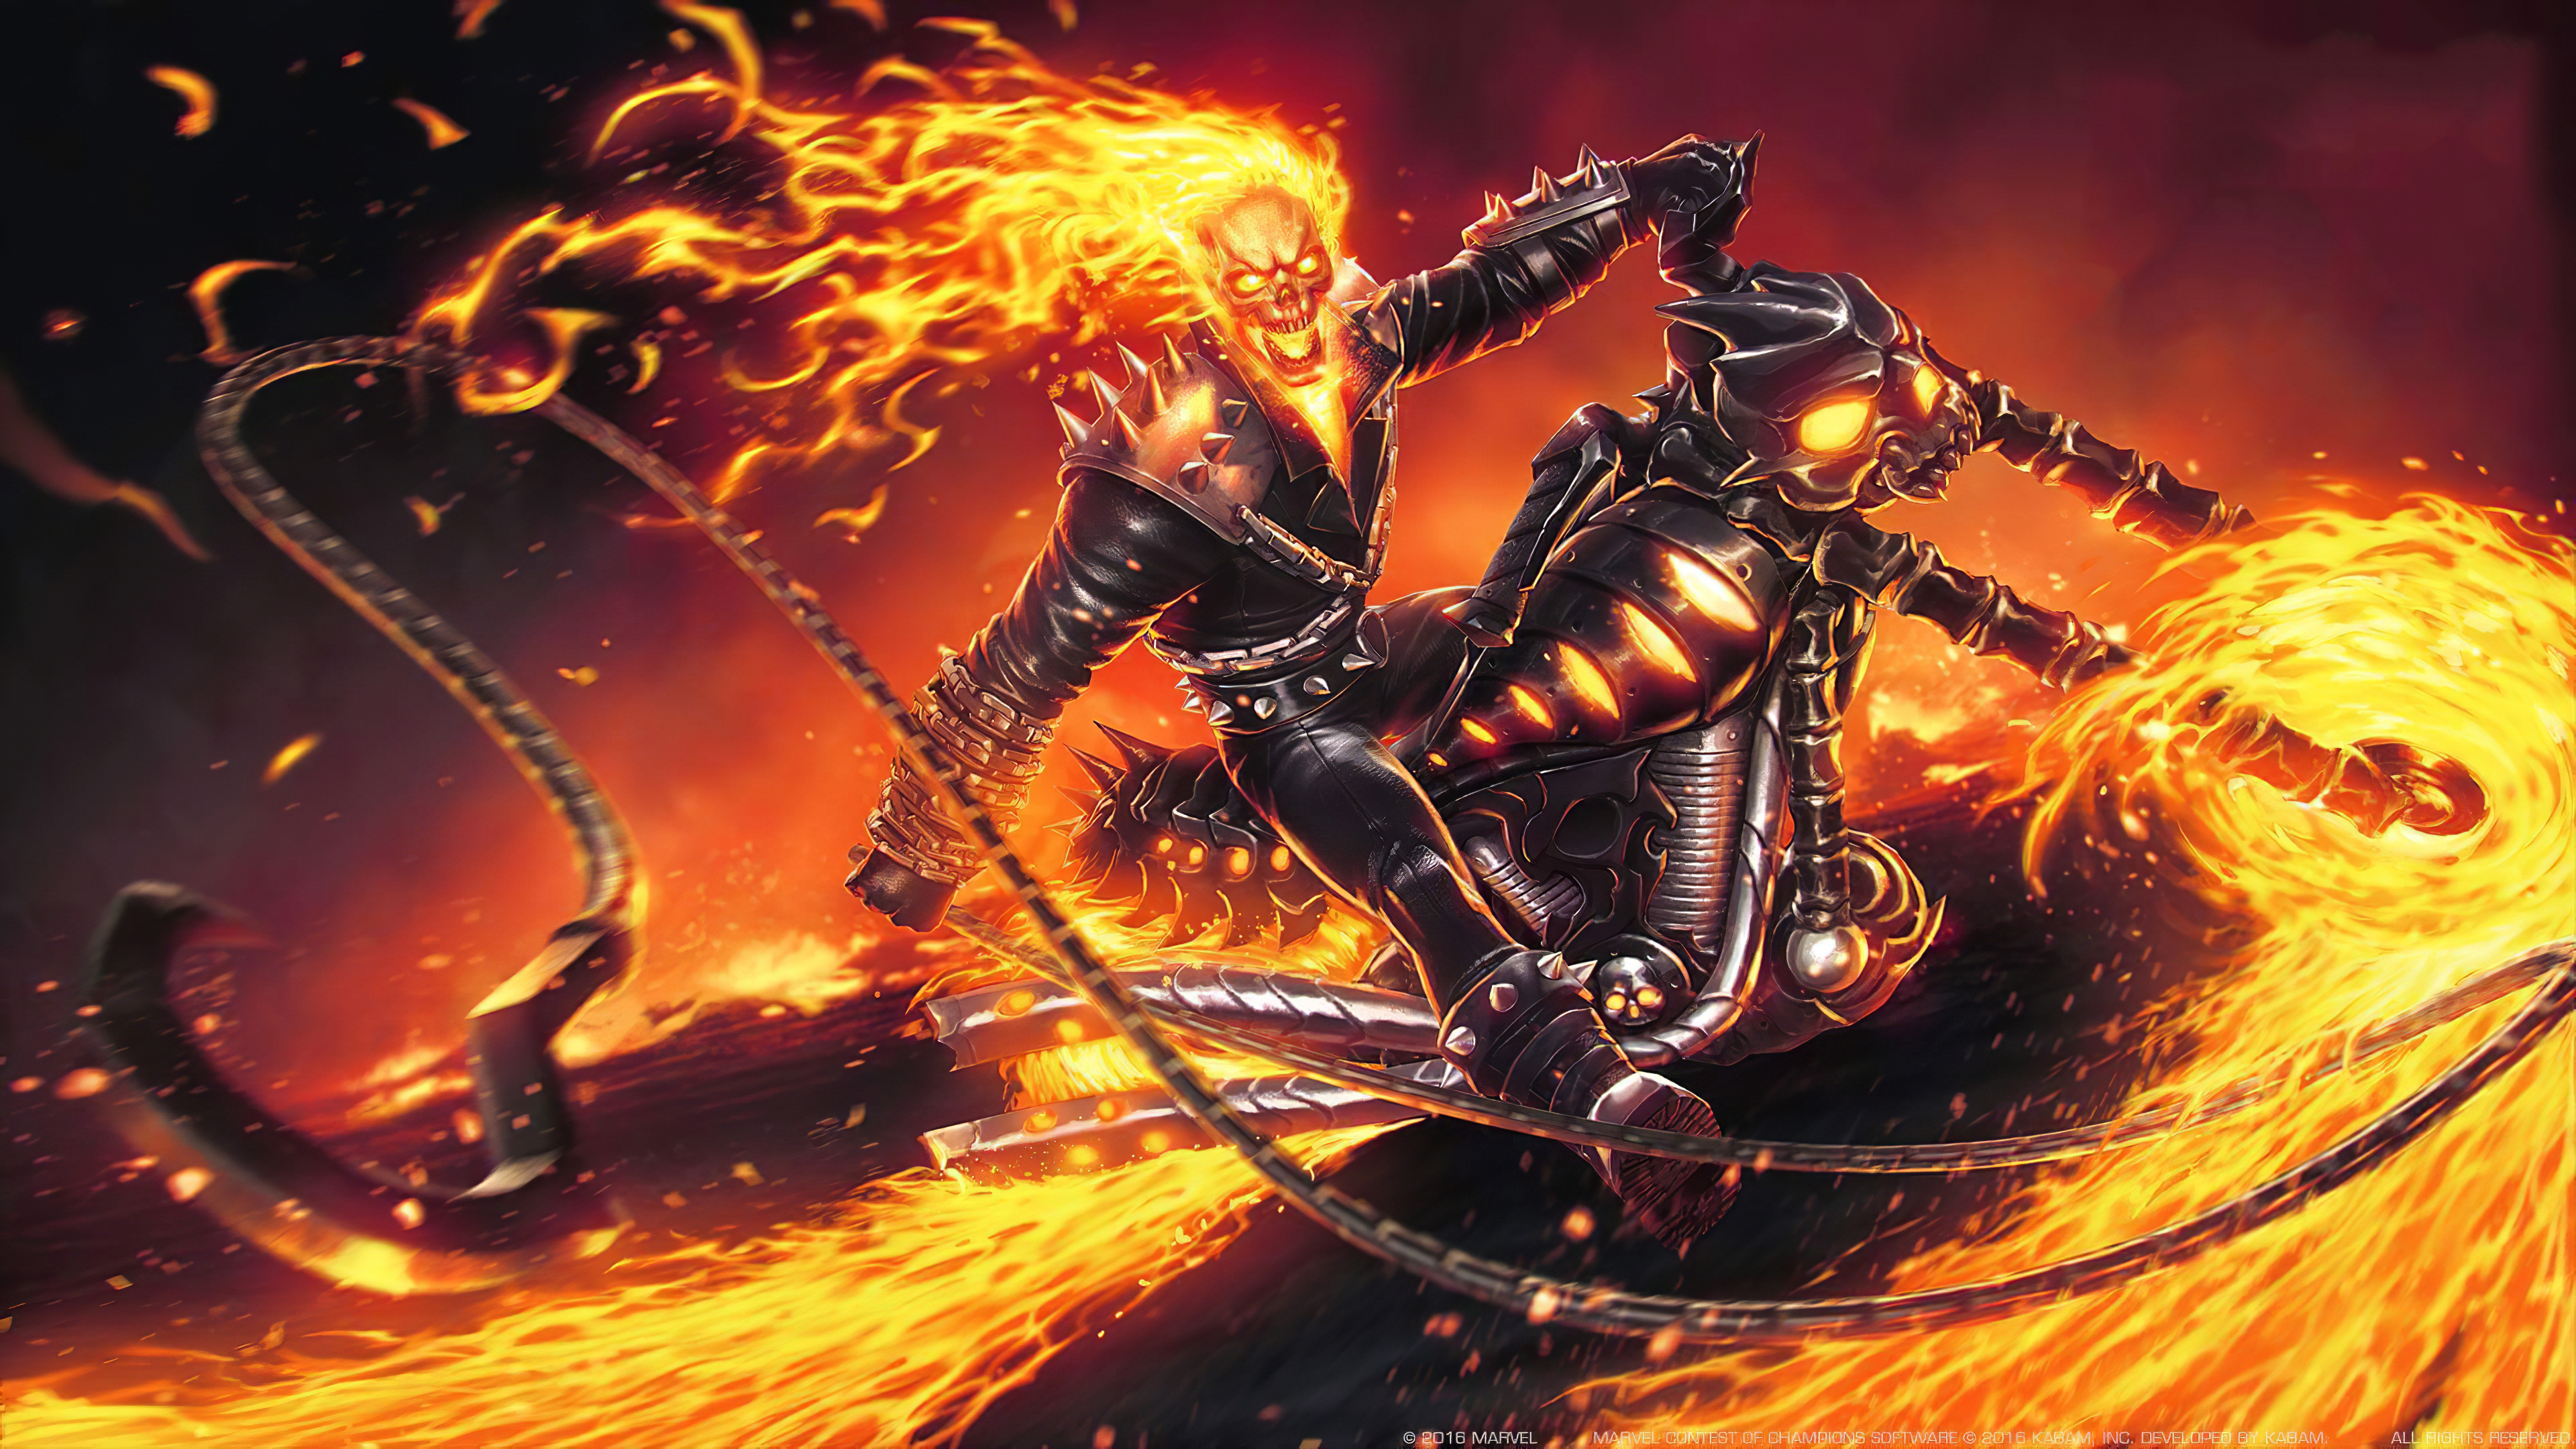 Wallpapers marvel contest of champions ghost rider rendering on the desktop